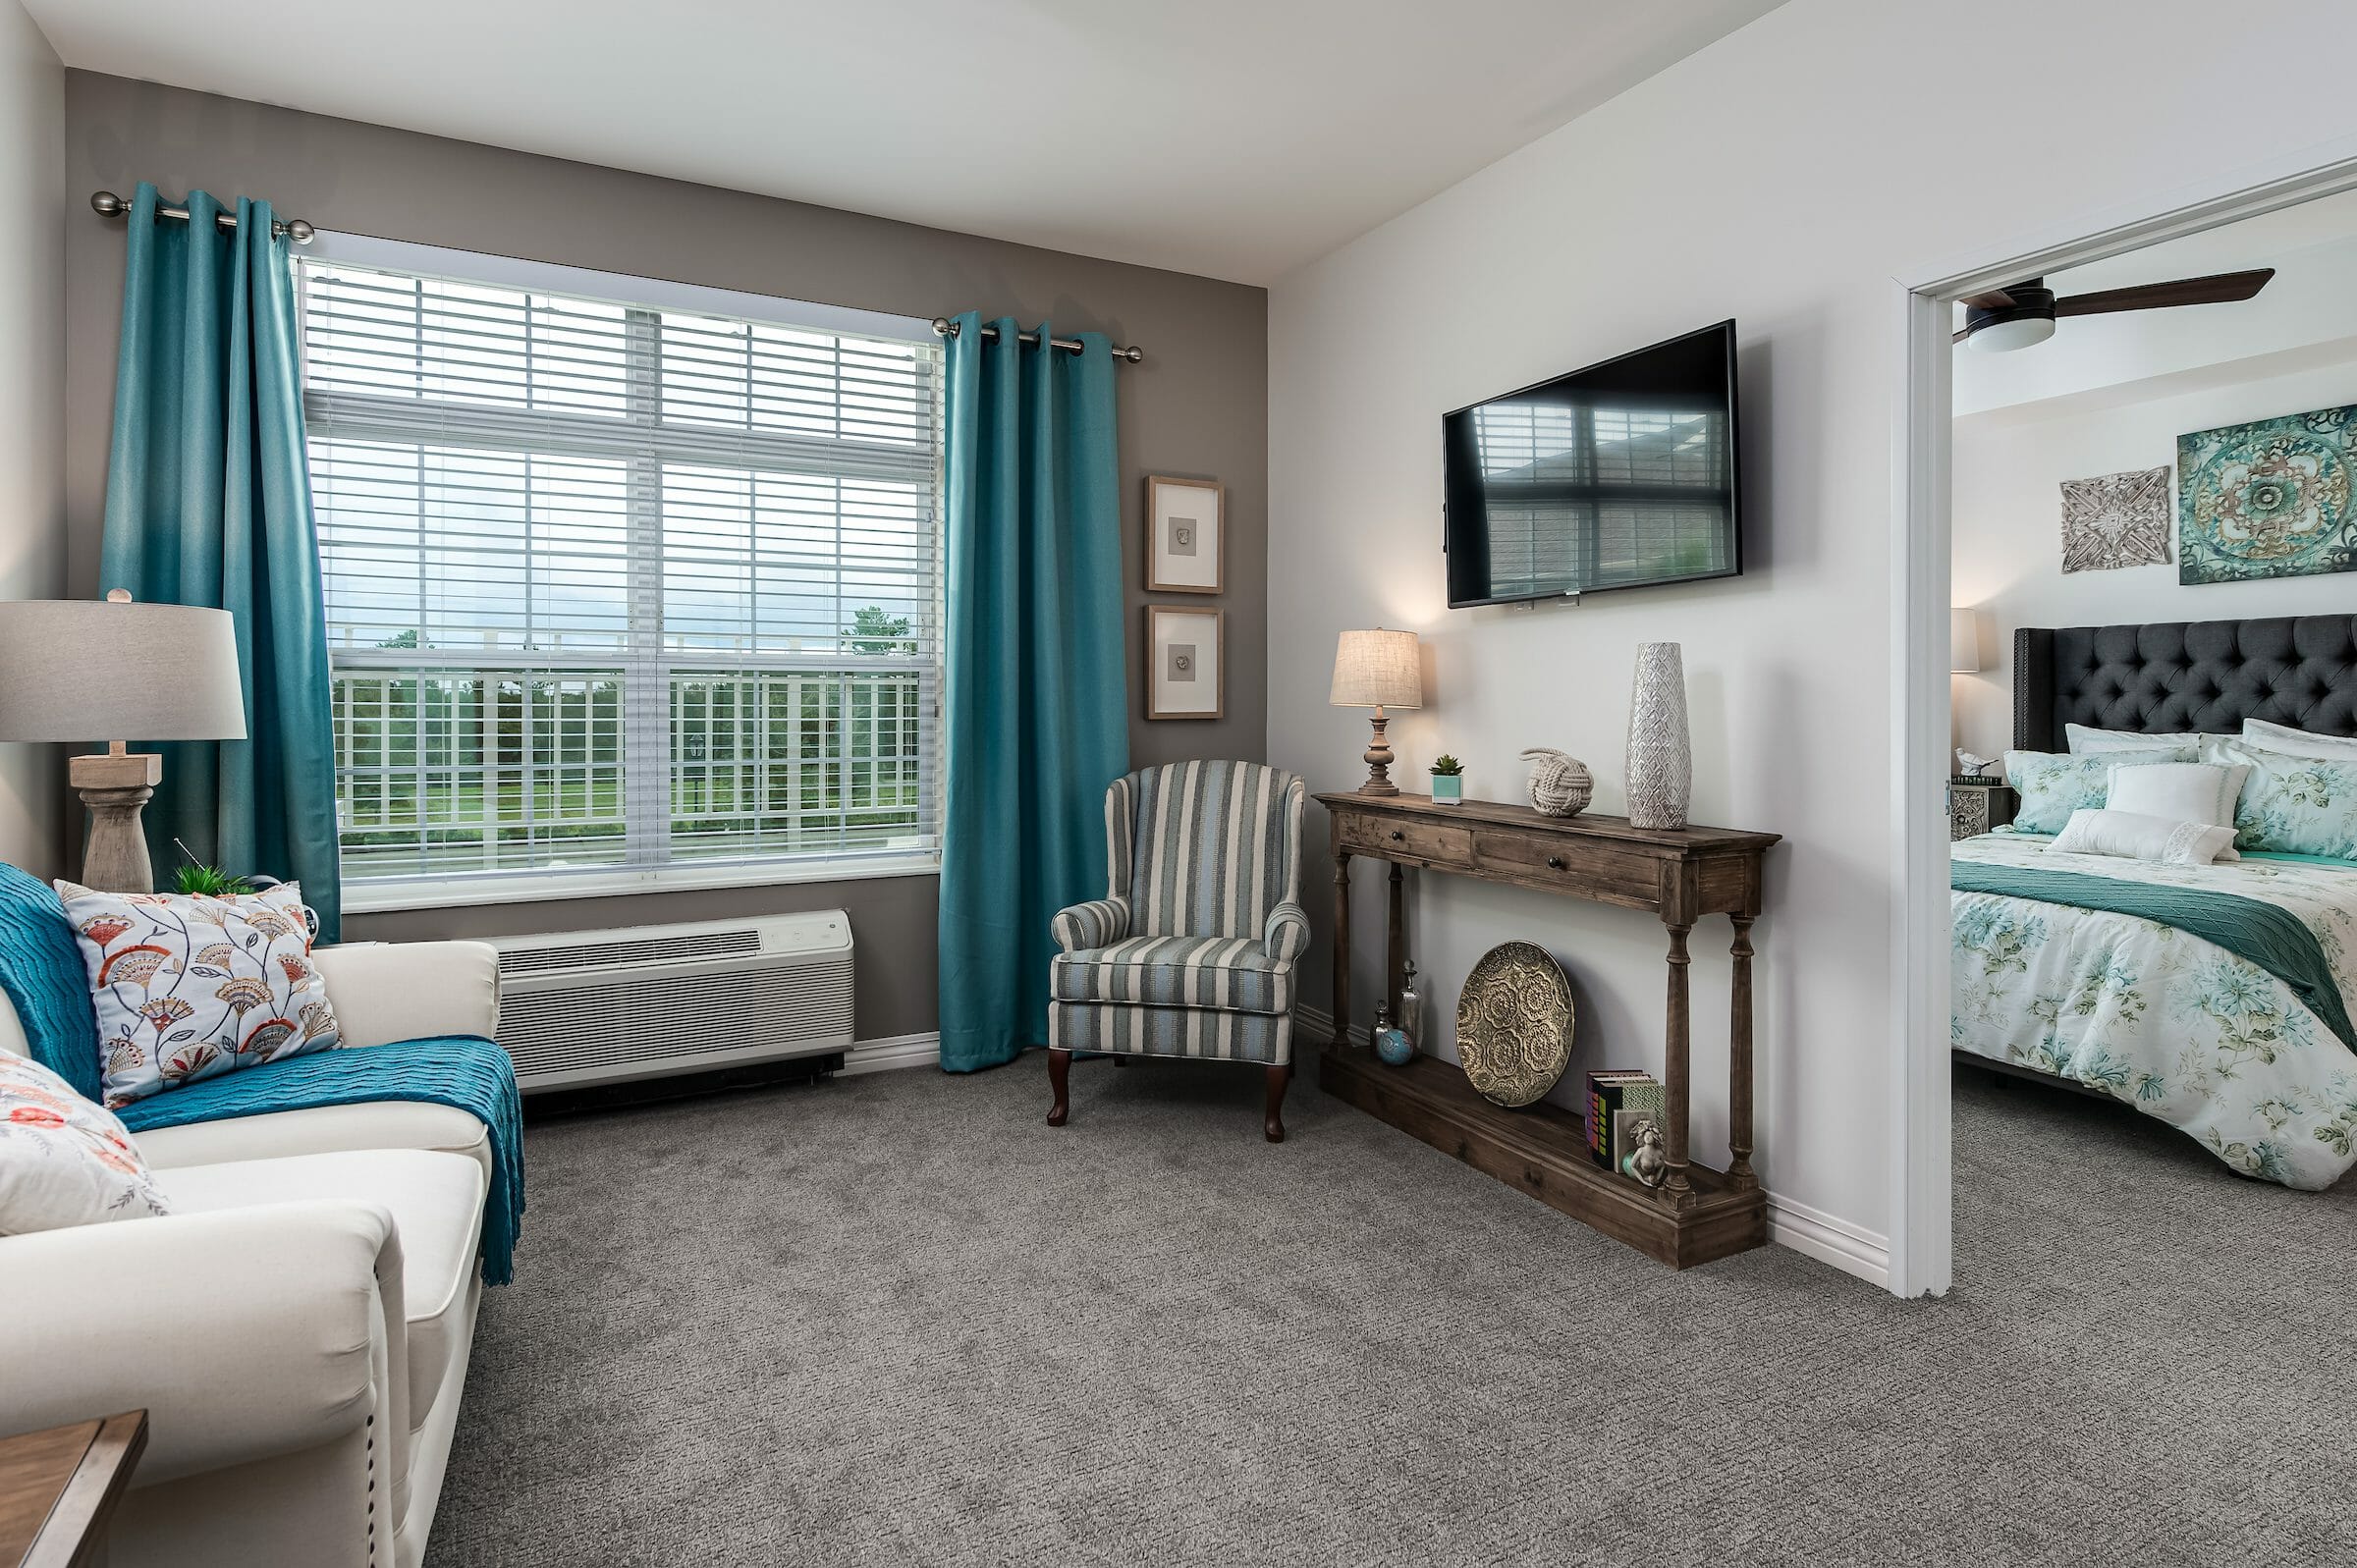 Inside view of a living room and bedroom, both with white, gray and blue accent colors